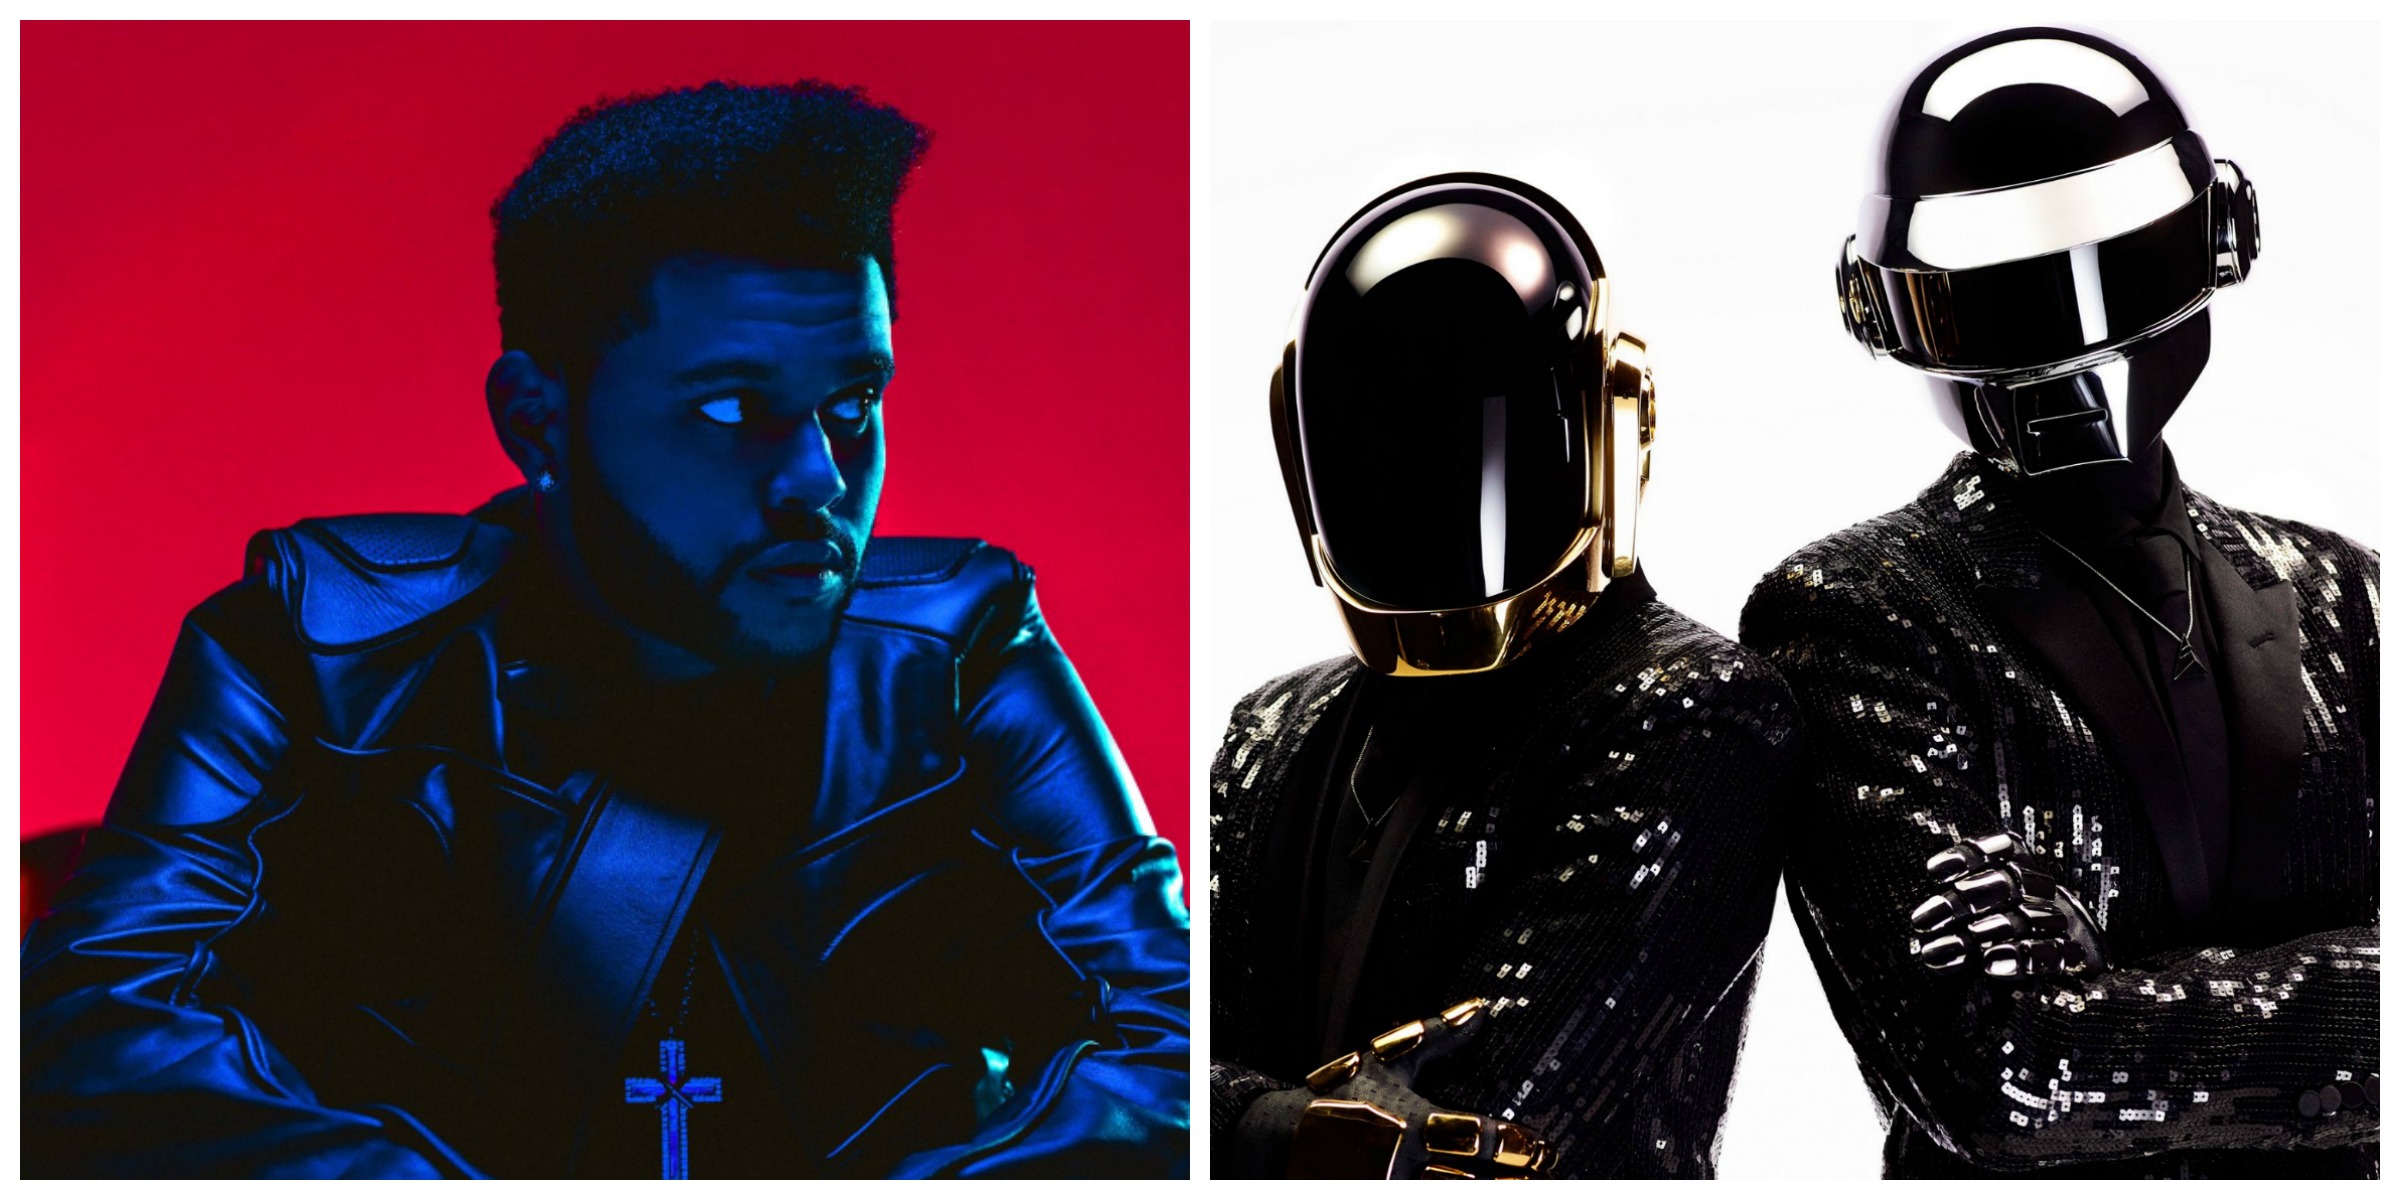 Daft Punk and The Weeknd Have Another Collab Coming Out Soon - GDE2400 x 1200